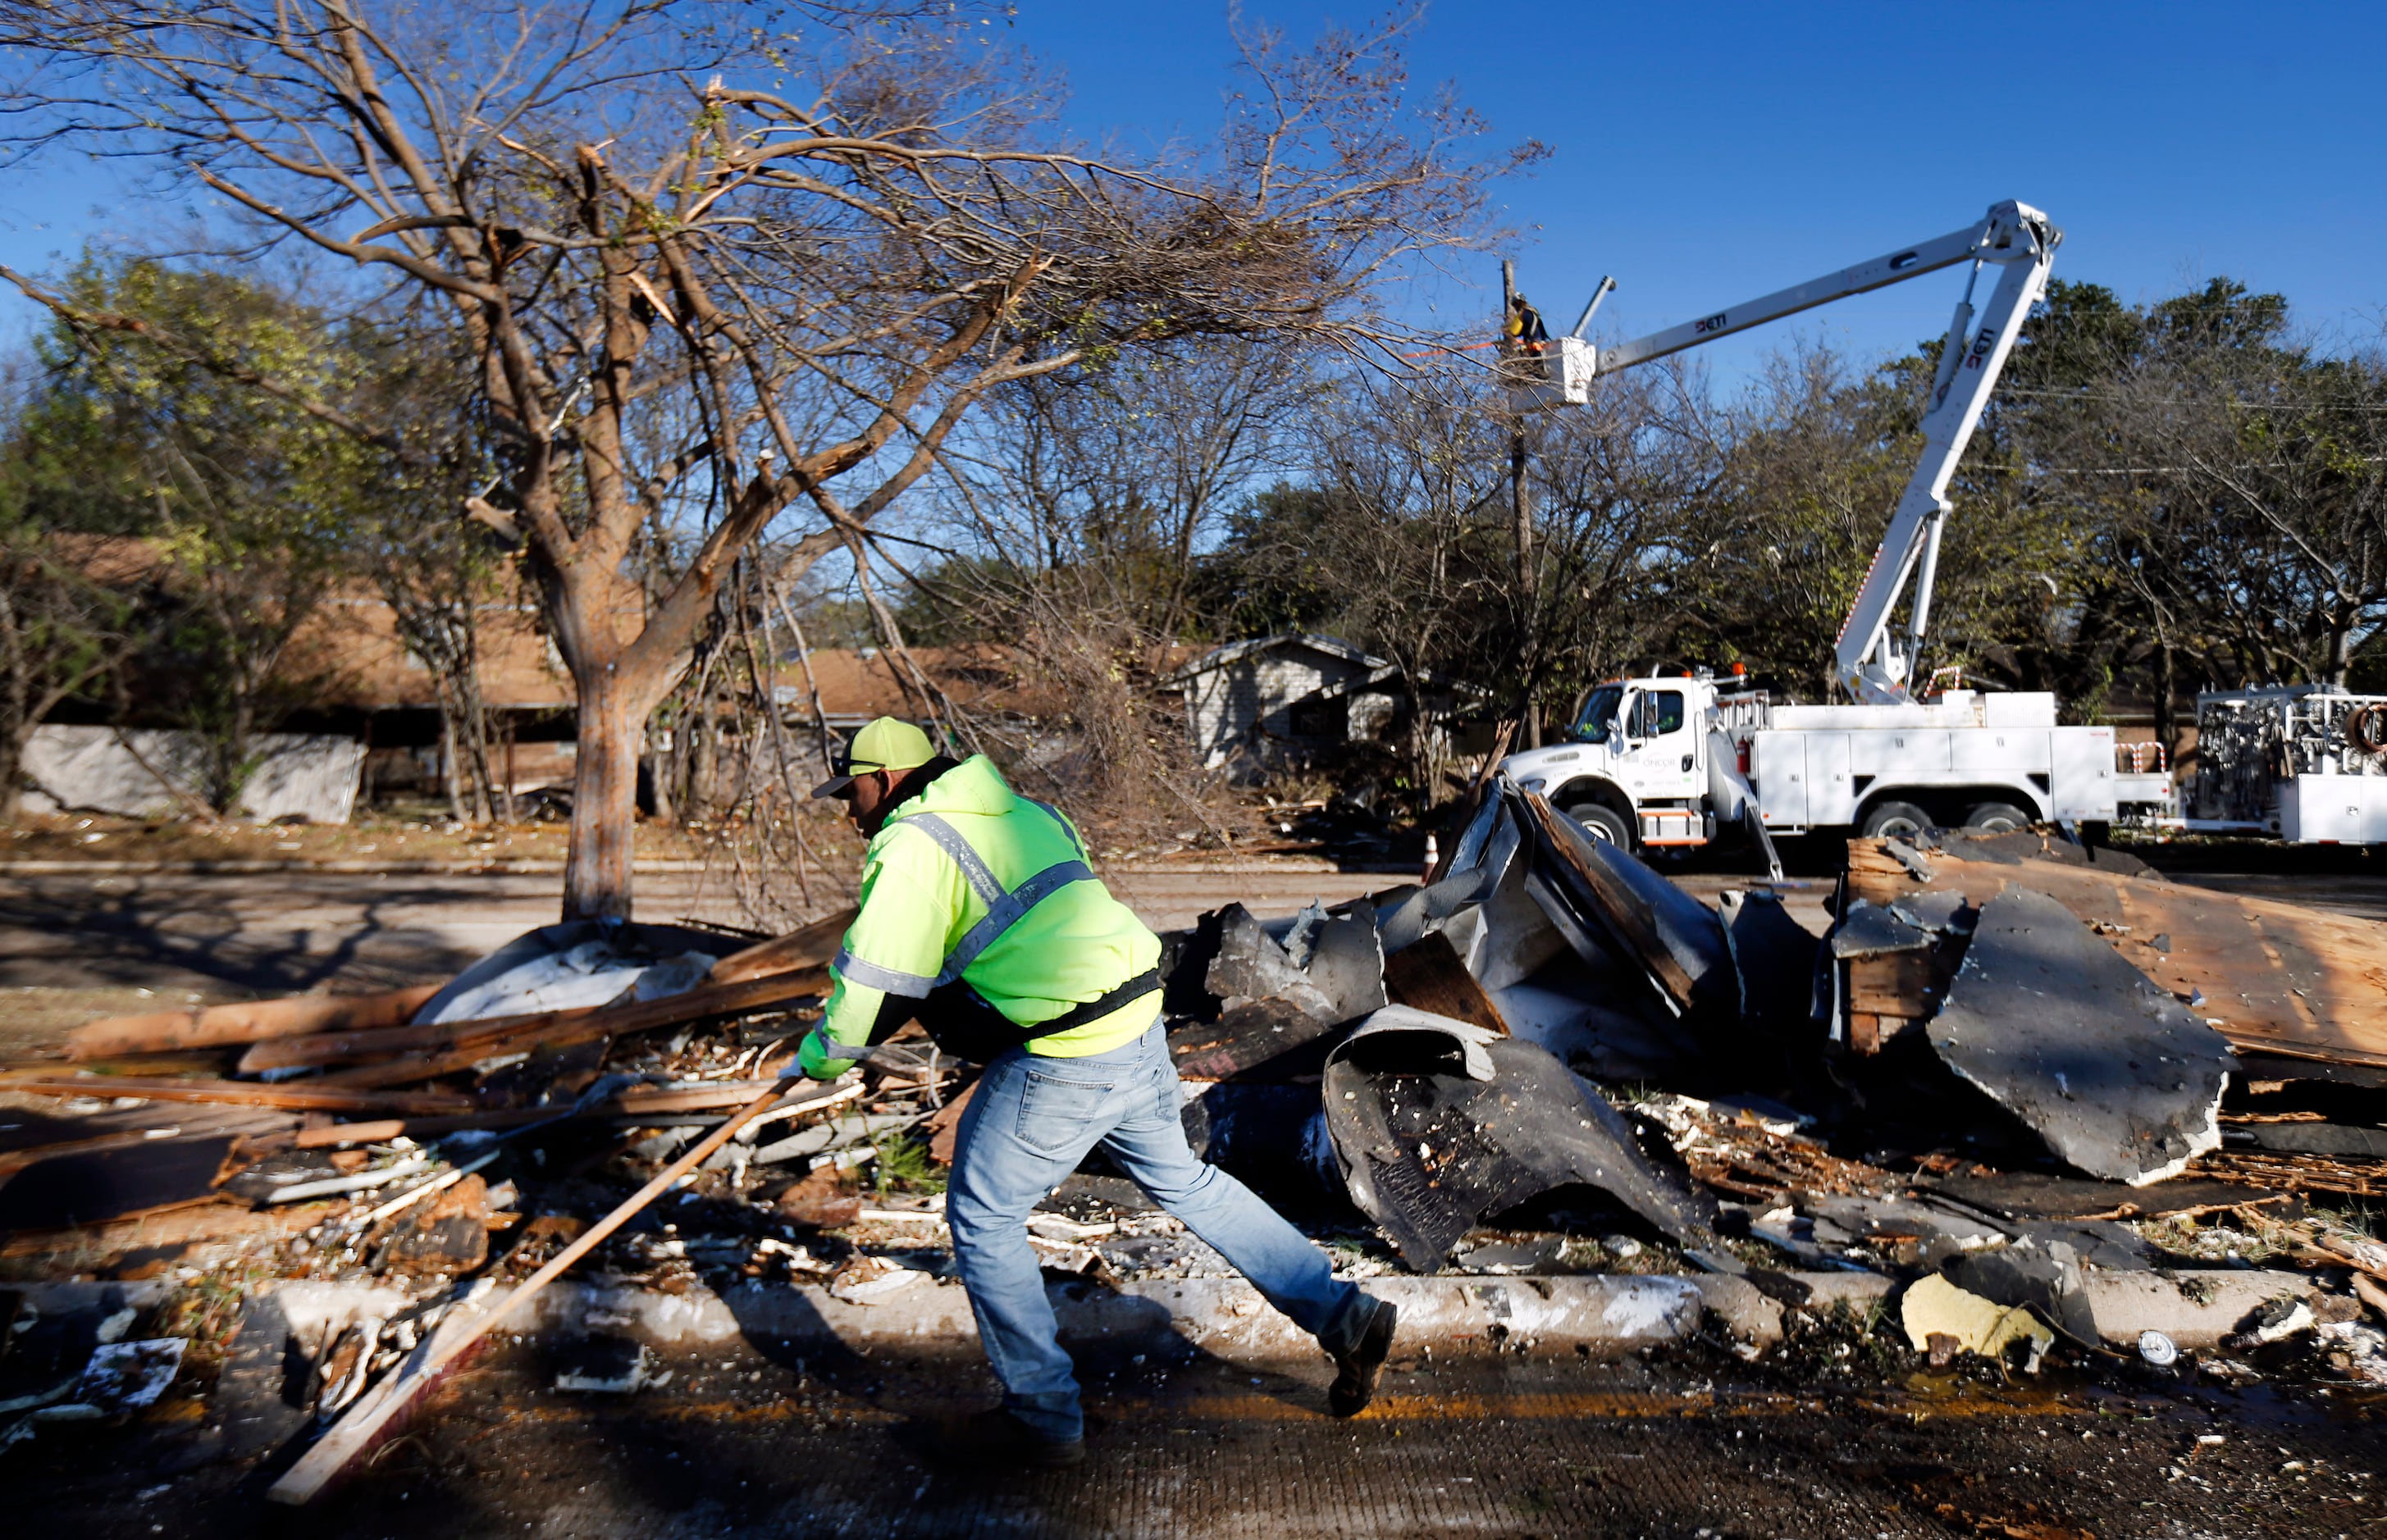 A City of Arlington street crewman cleans up debris from The Mirage Apartments complex along...